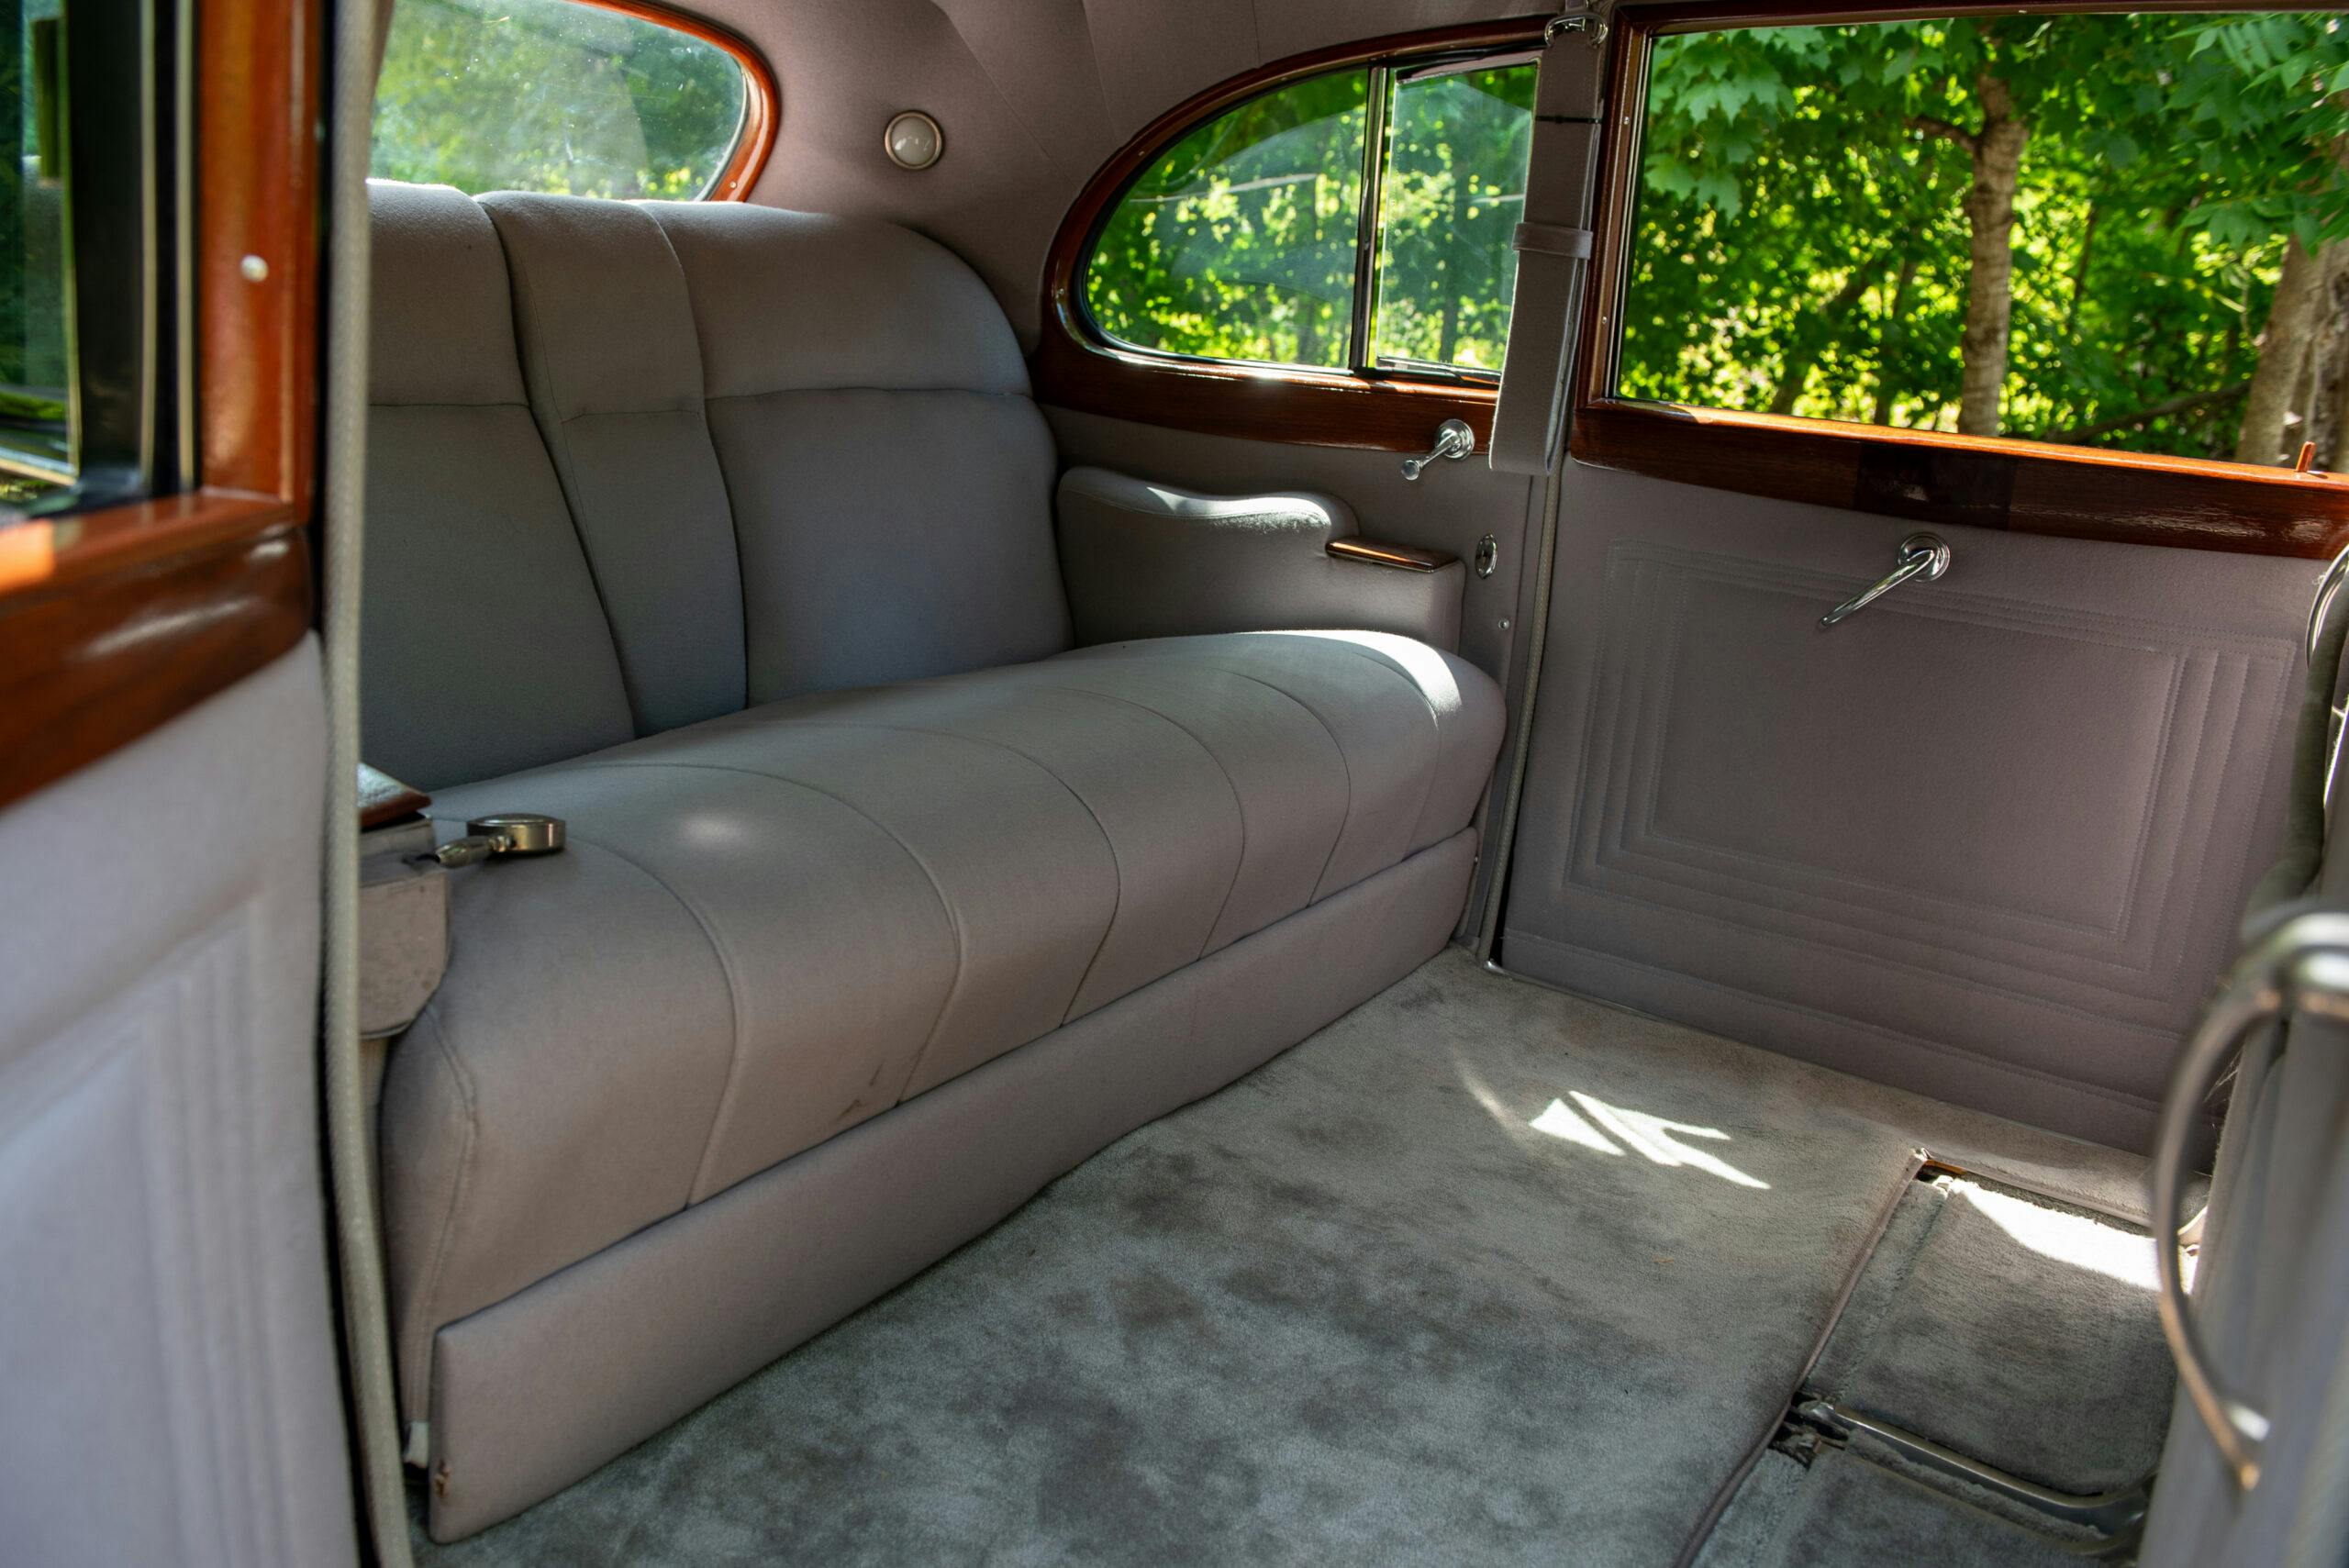 1941 Packard Super Eight One-Eighty Limo interior rear seat